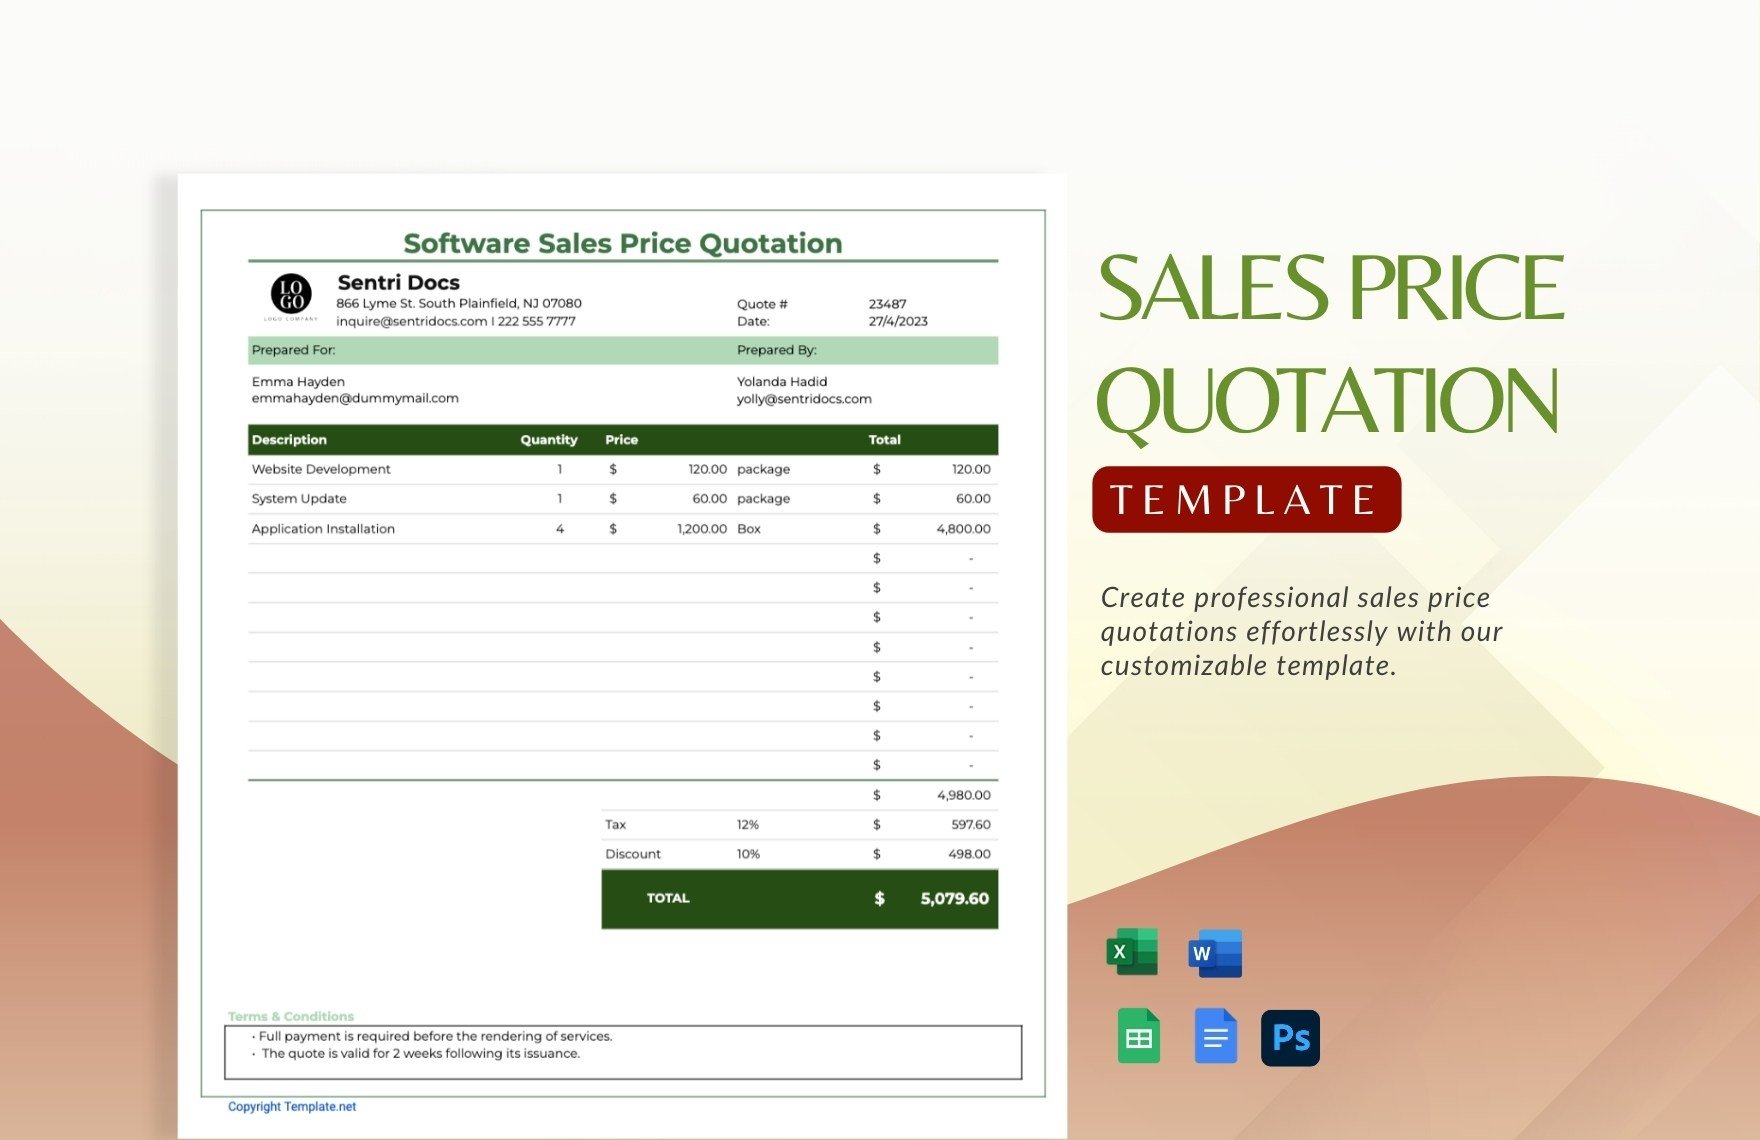 Sales Price Quotation Template in Word, Google Docs, Excel, Google Sheets, PSD